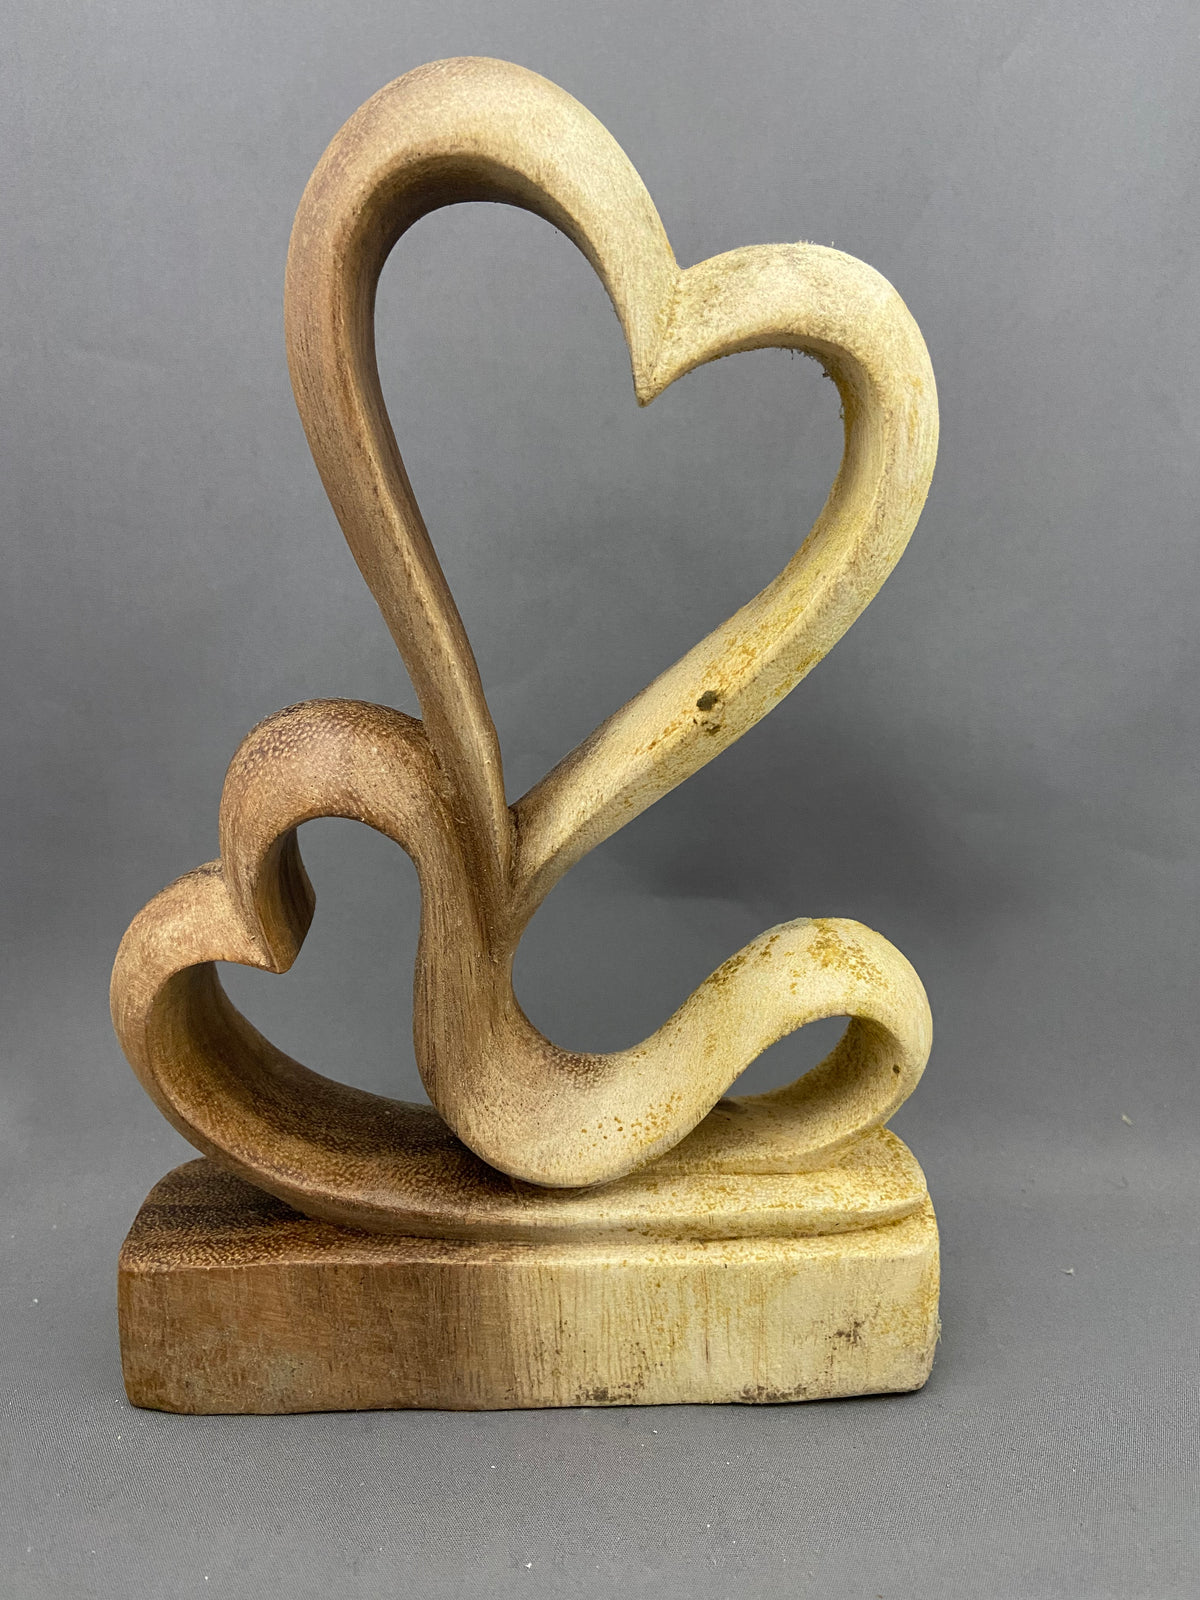 Double Heart Statue from Bali